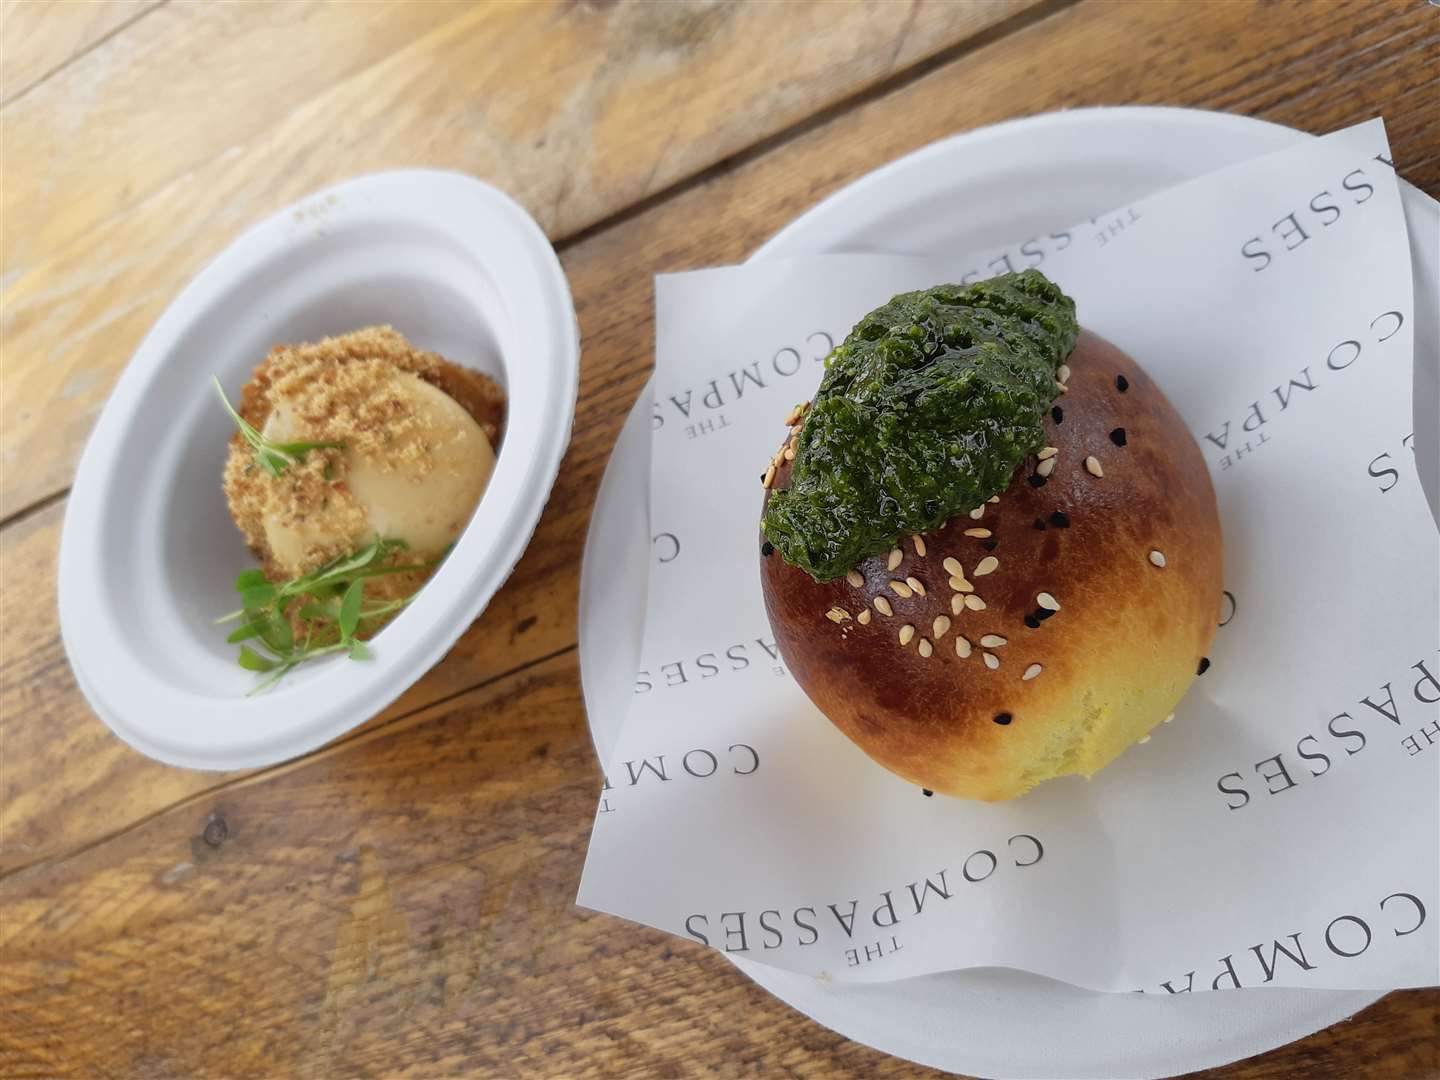 Crispy ox cheek with caramelised onion, miso mayonnaise and bacon crumb and confit lamb brioche bun with wild garlic pesto from The Compasses at Crundale